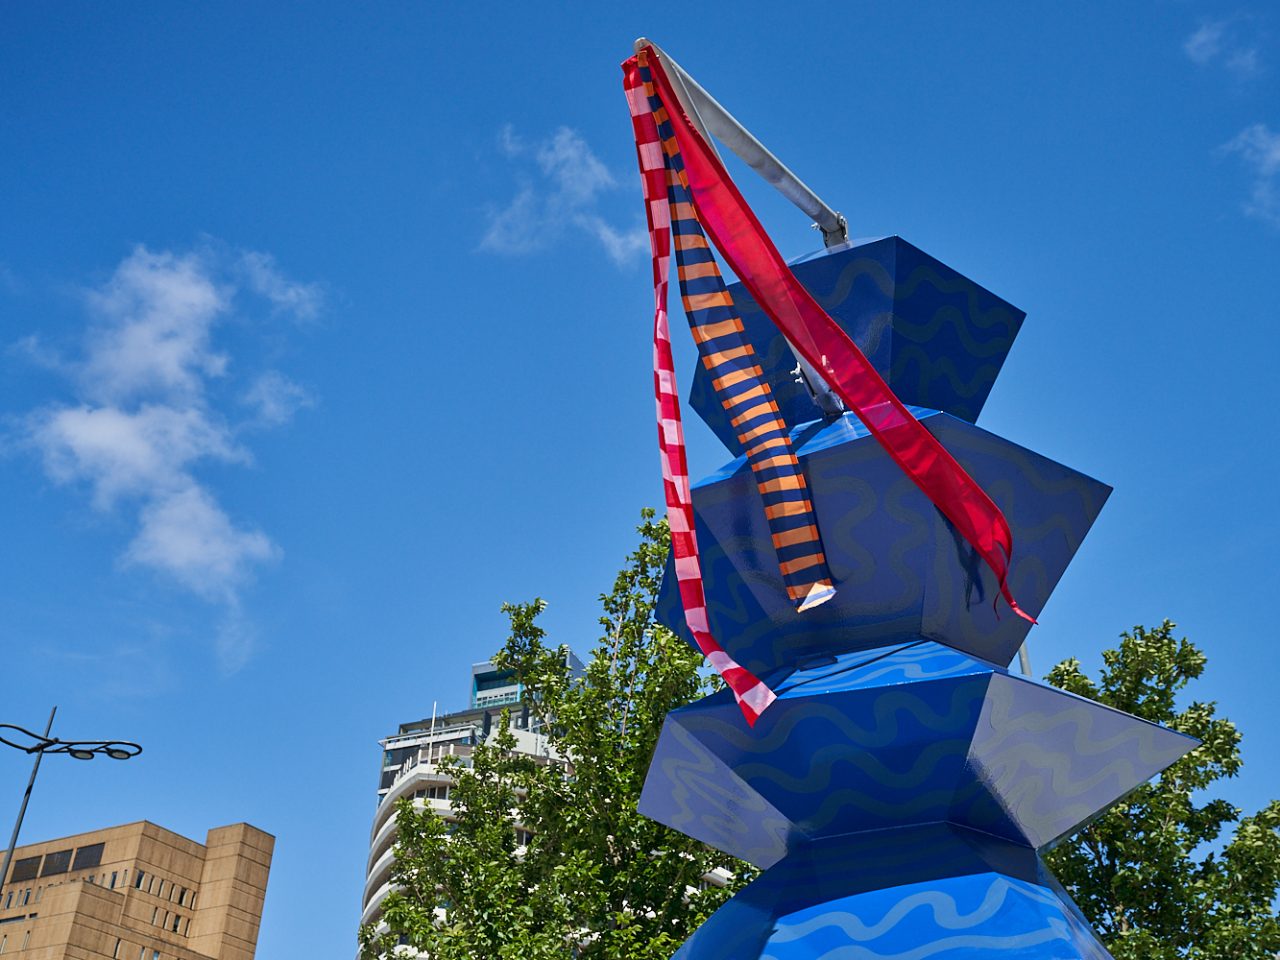 A totem painted blue with pale blue squiggles. At the top of the totem is a pole pointing out of it and 3 ribbons moving in the wind